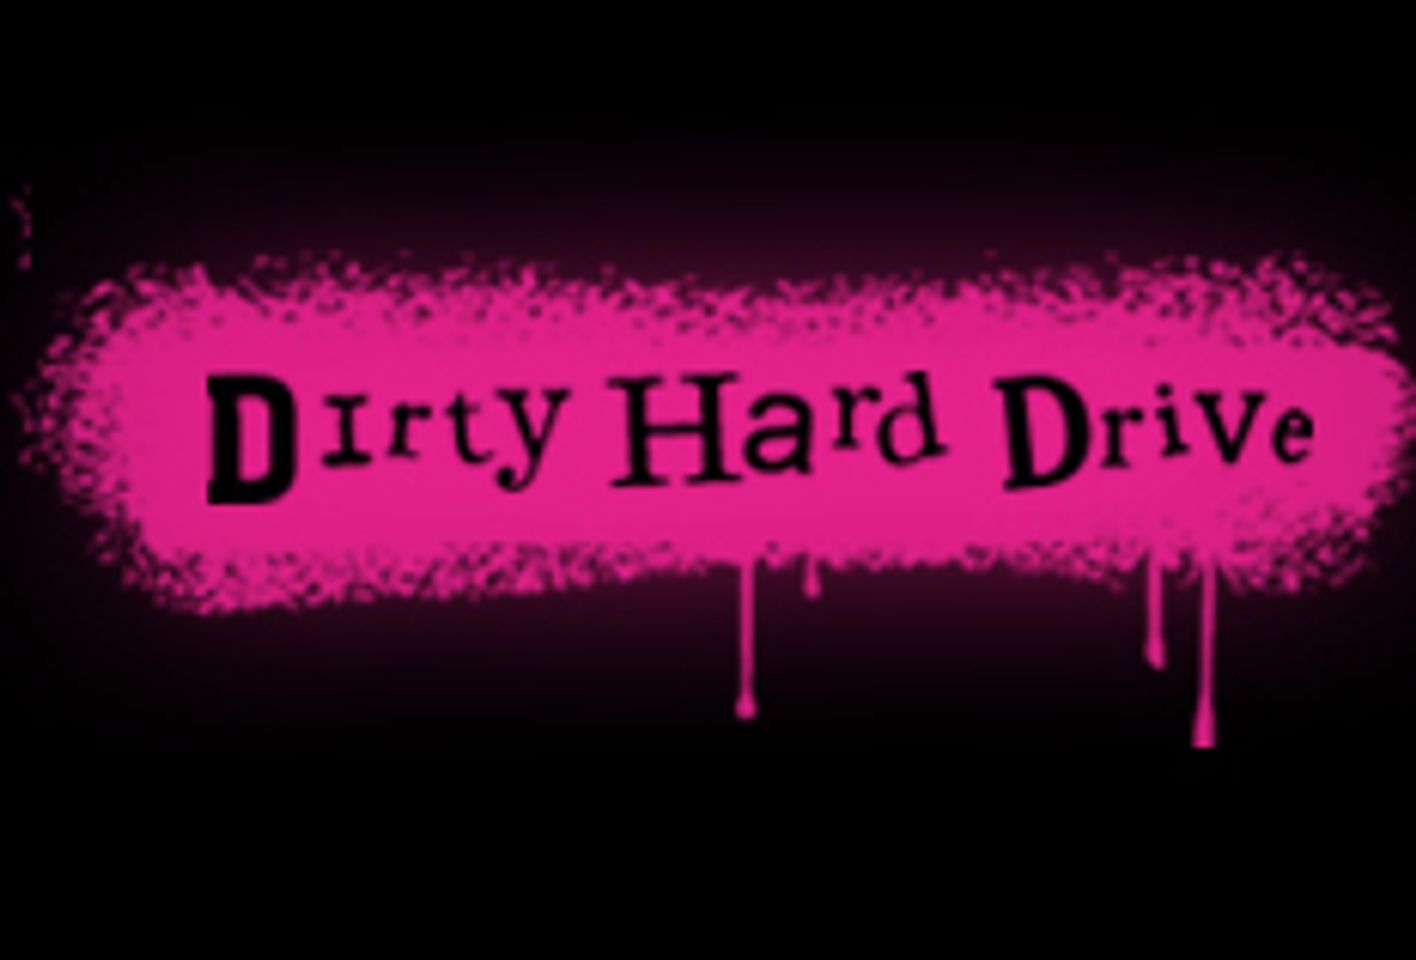 Dirty Hard Drive Launches Major Redesign